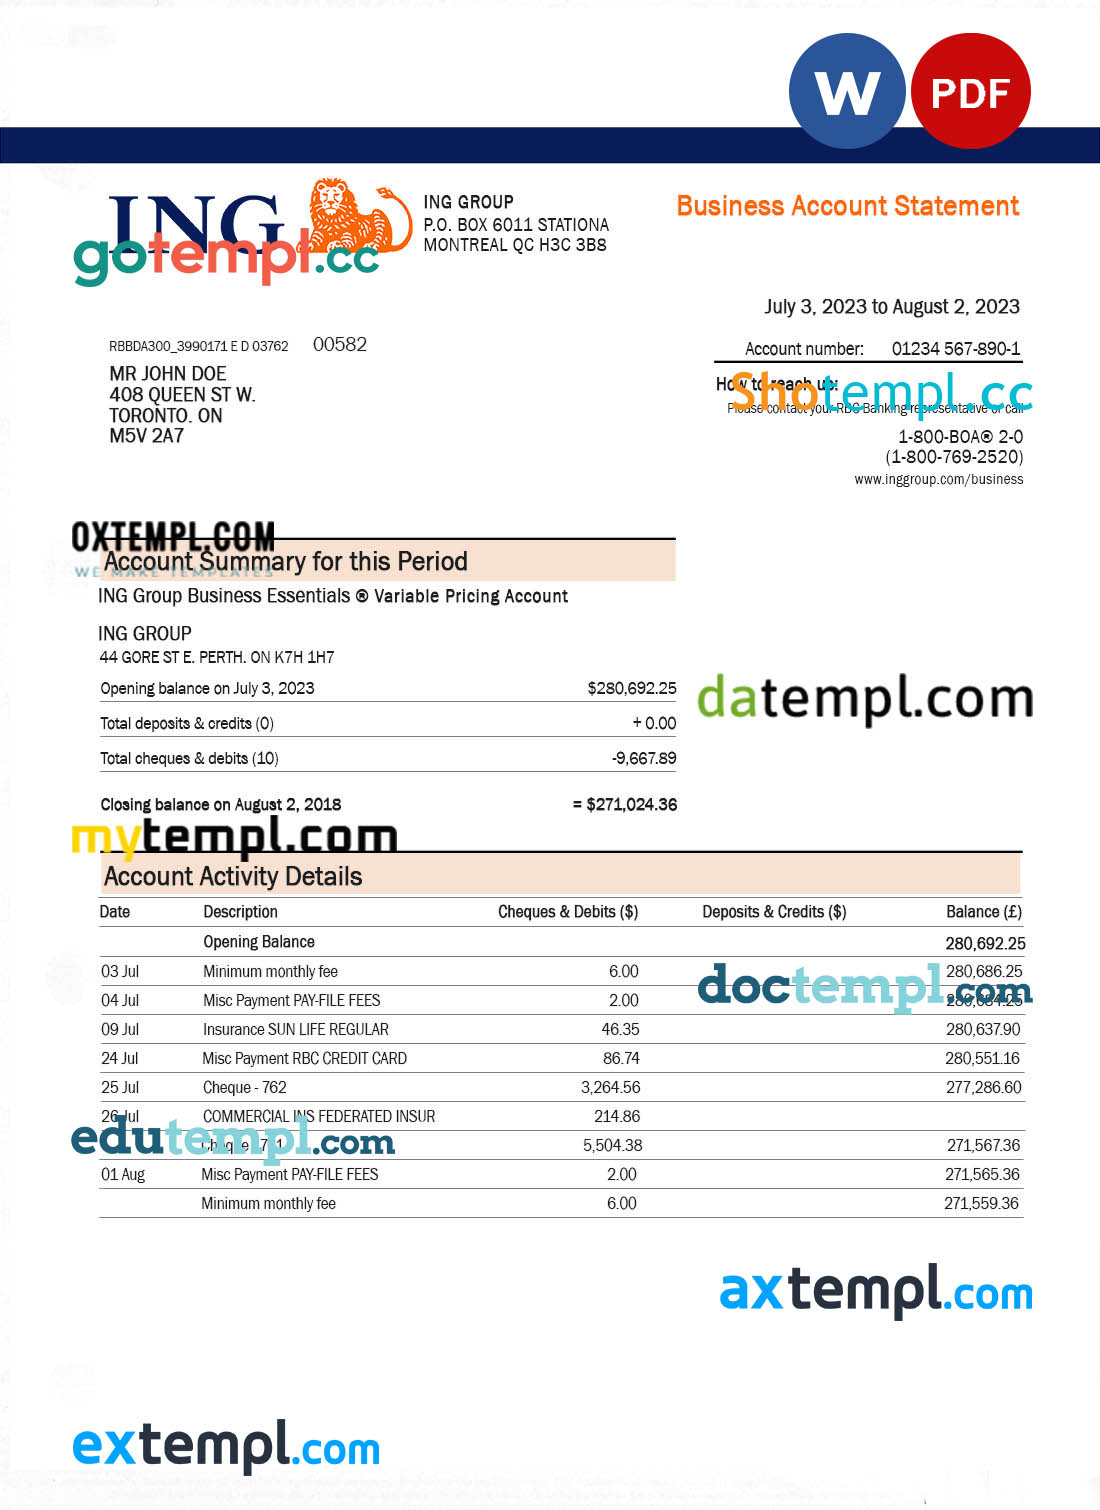 editable template, ING Groep bank company account statement Word and PDF template